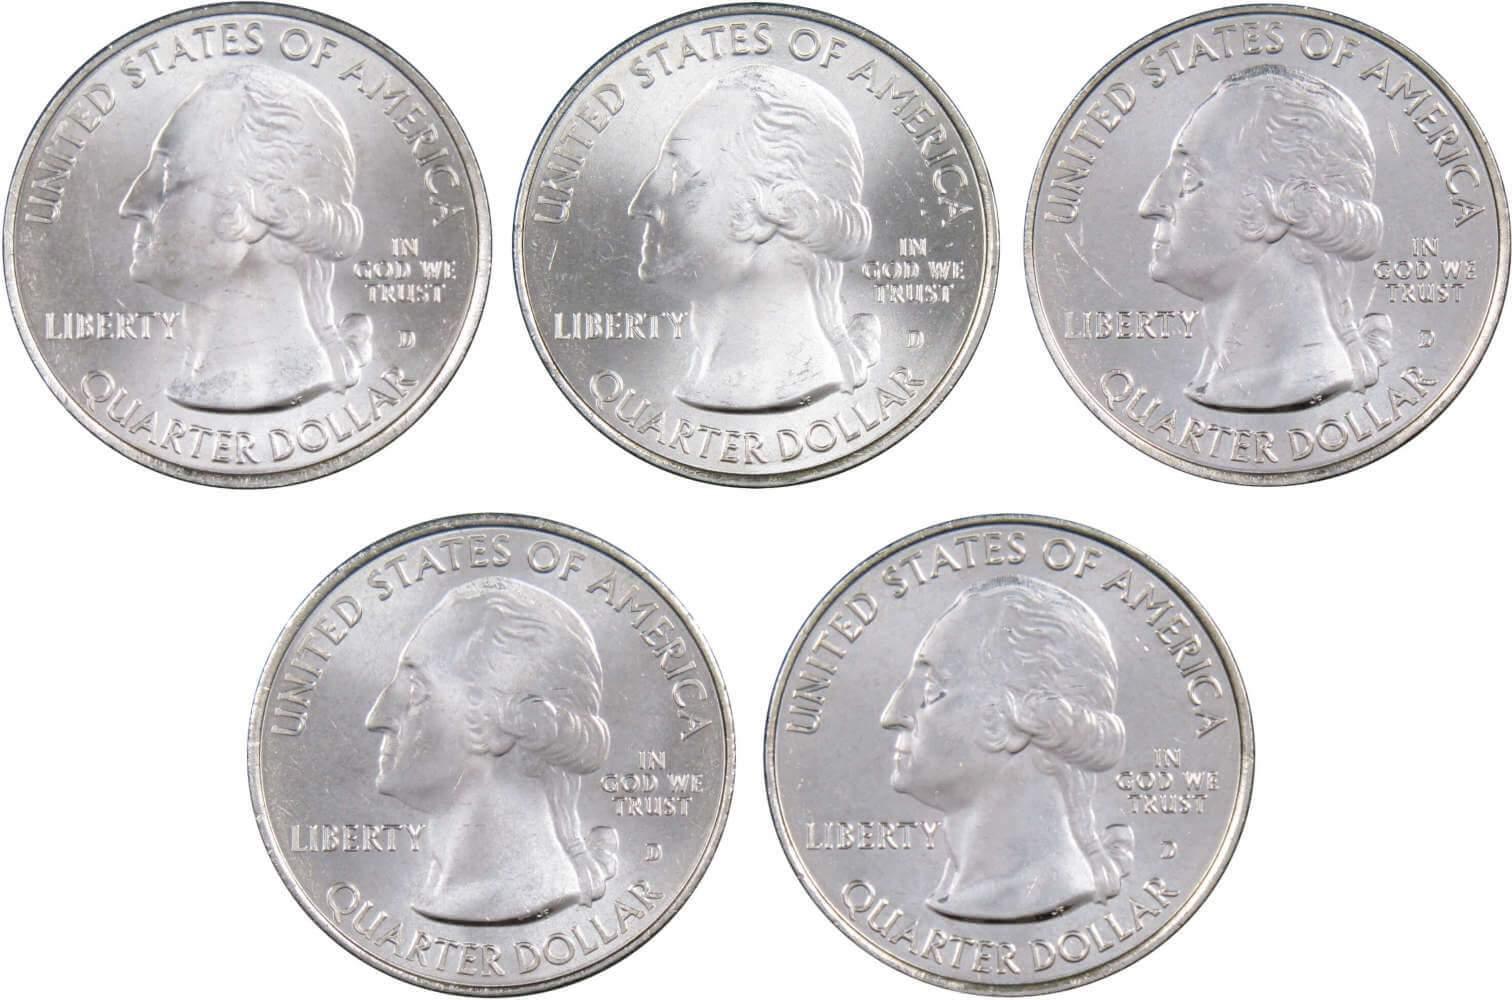 2015 D National Park Quarter 5 Coin Set Uncirculated Mint State 25c Collectible